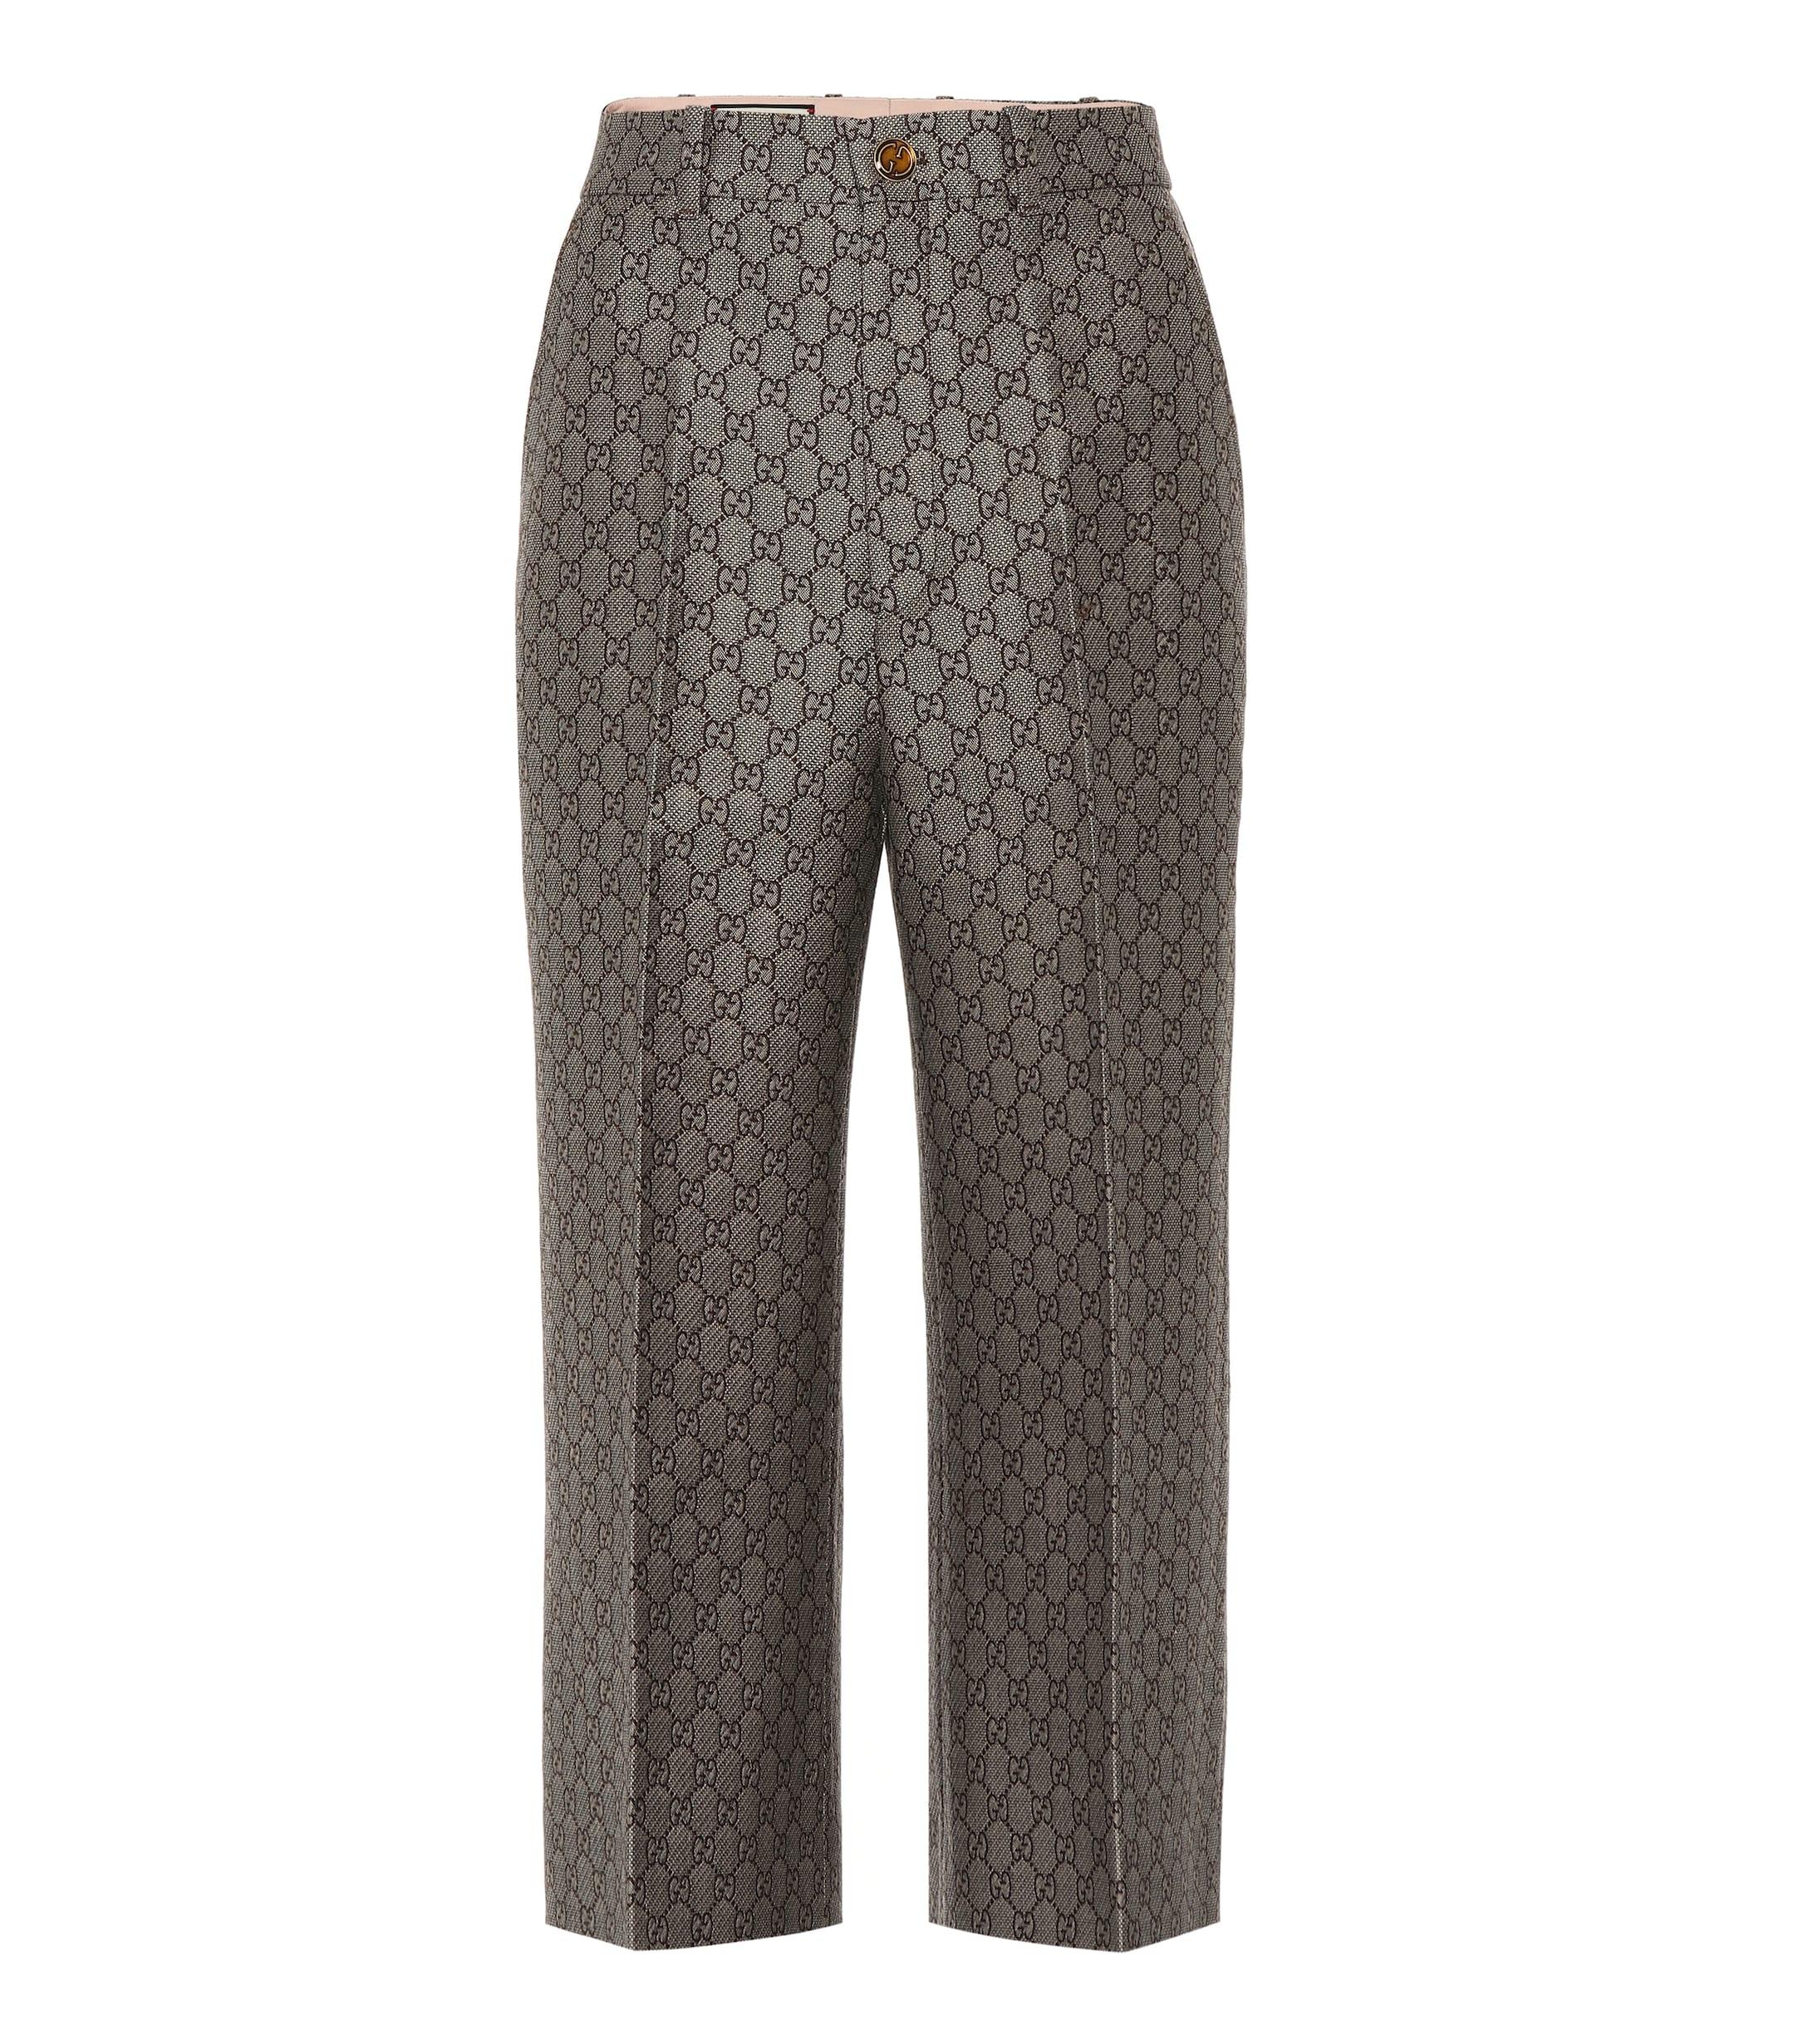 Gucci GG Jacquard Pants in Brown - Lyst